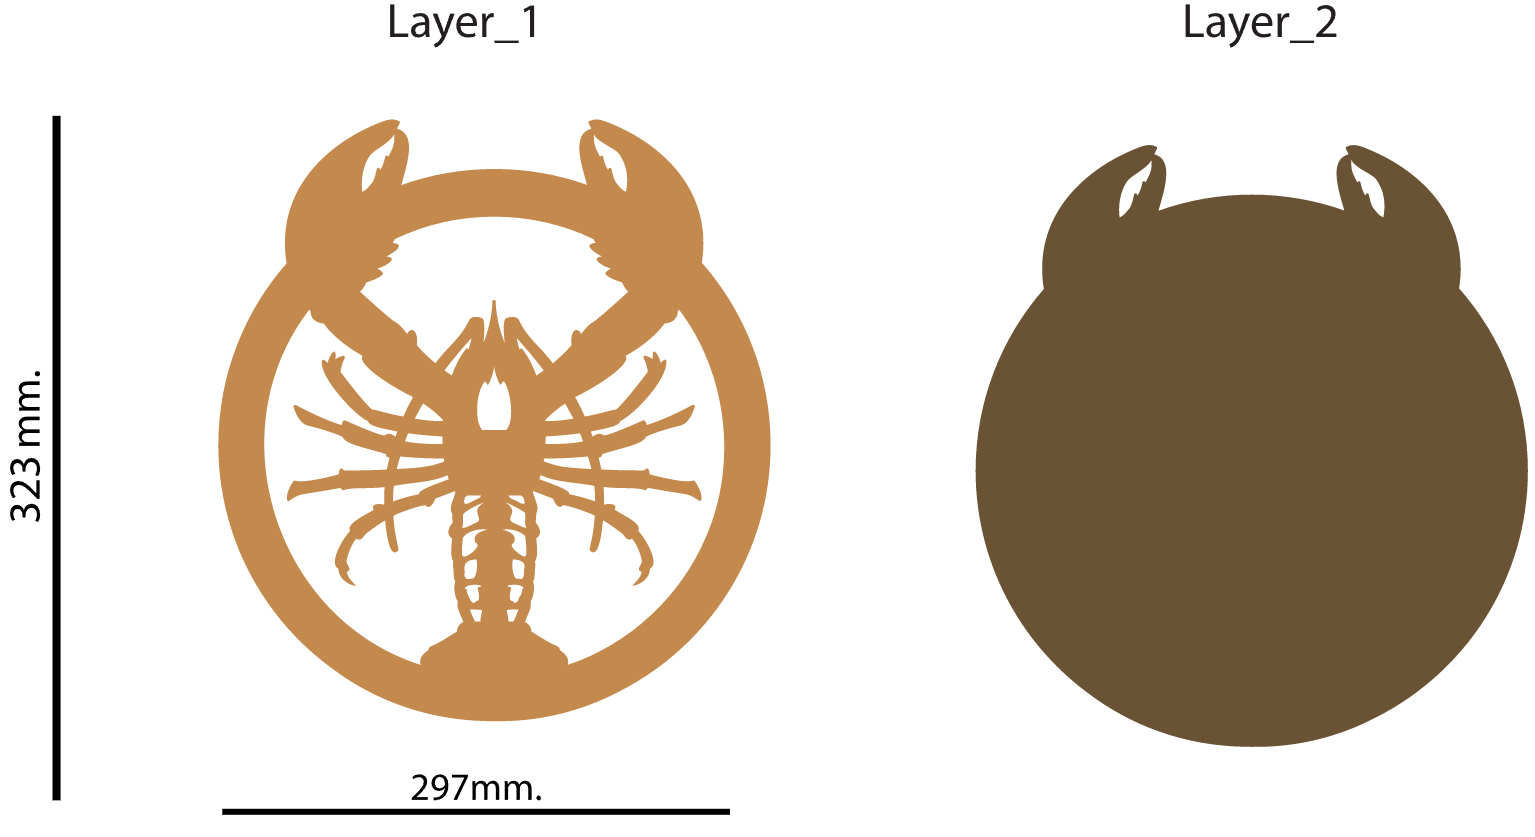 Lobster wooden coaster multilayer cut file 2 layers